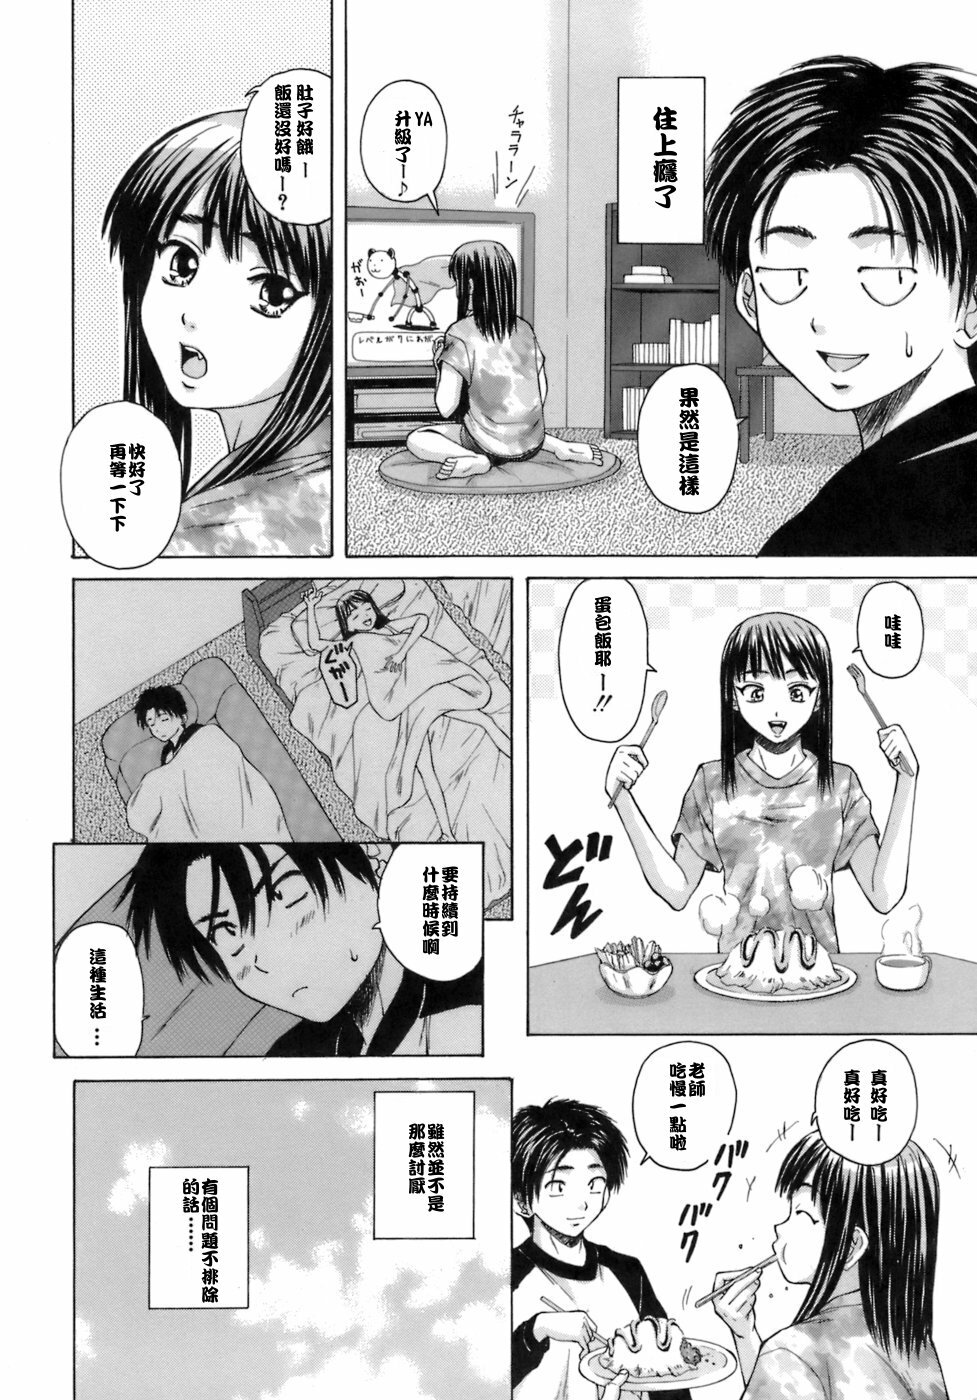 [Fuuga] Kyoushi to Seito to - Teacher and Student [Chinese] [悠月工房] page 19 full